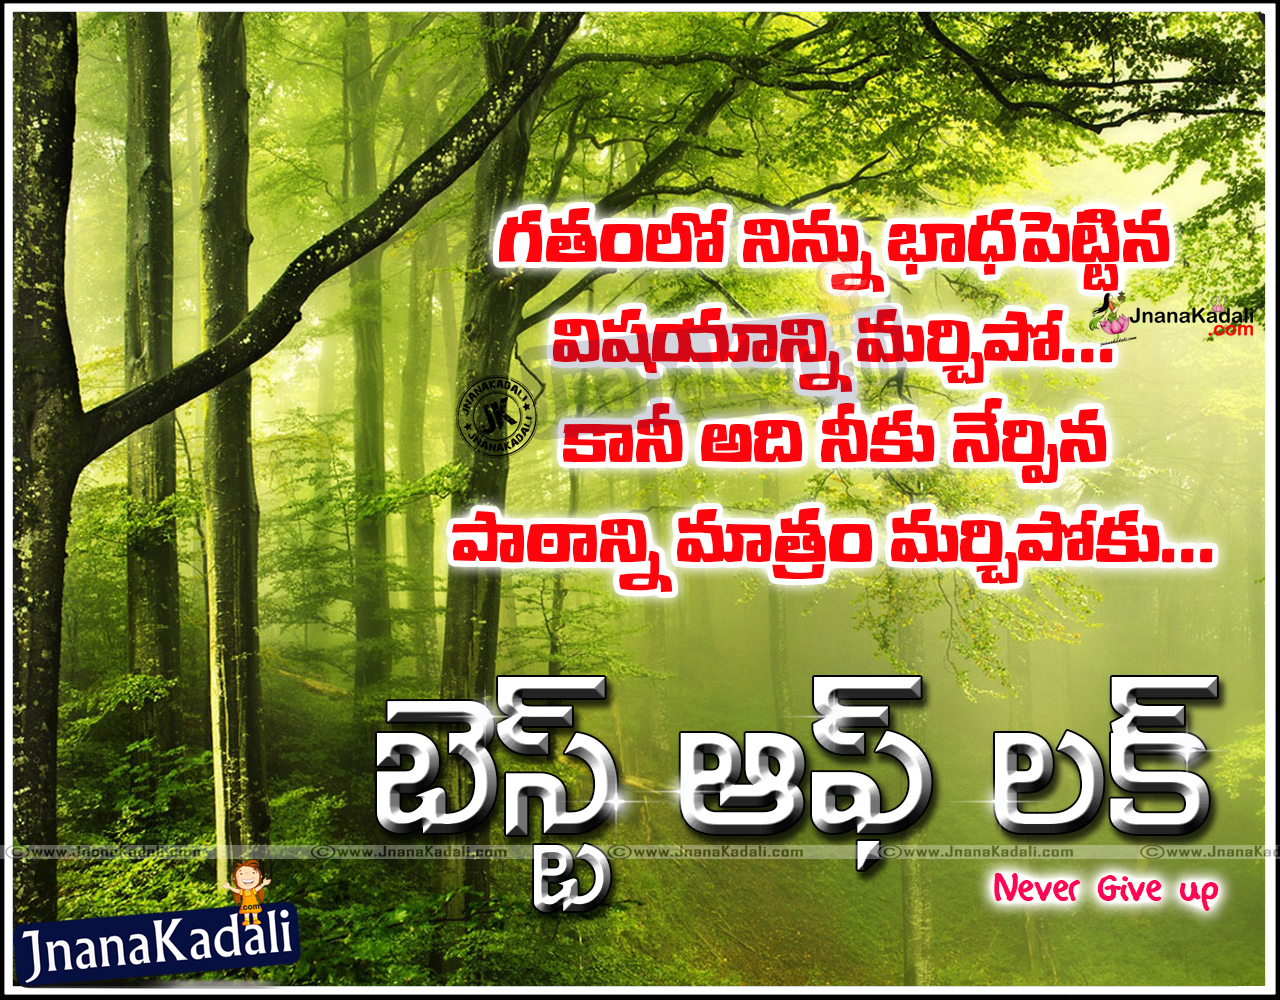 All the best for success inspiring quotes with best images in Telugu ALL THE BEST